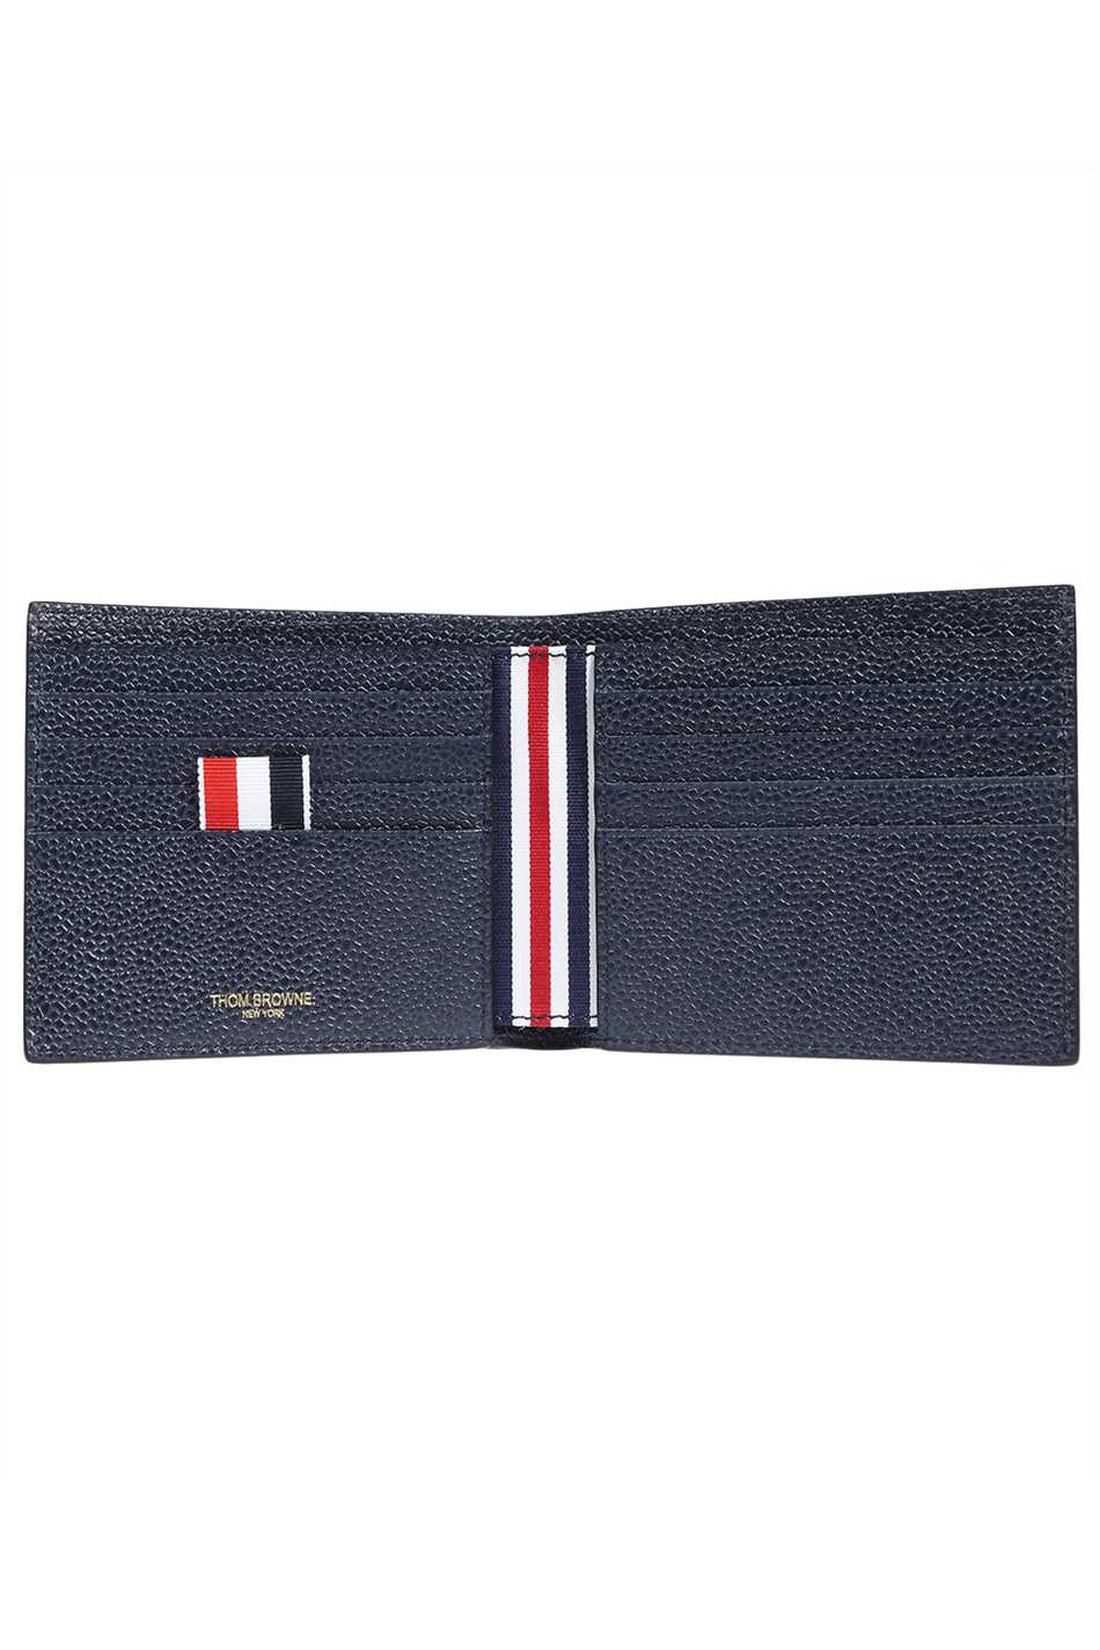 Thom Browne-OUTLET-SALE-Leather flap-over wallet-ARCHIVIST